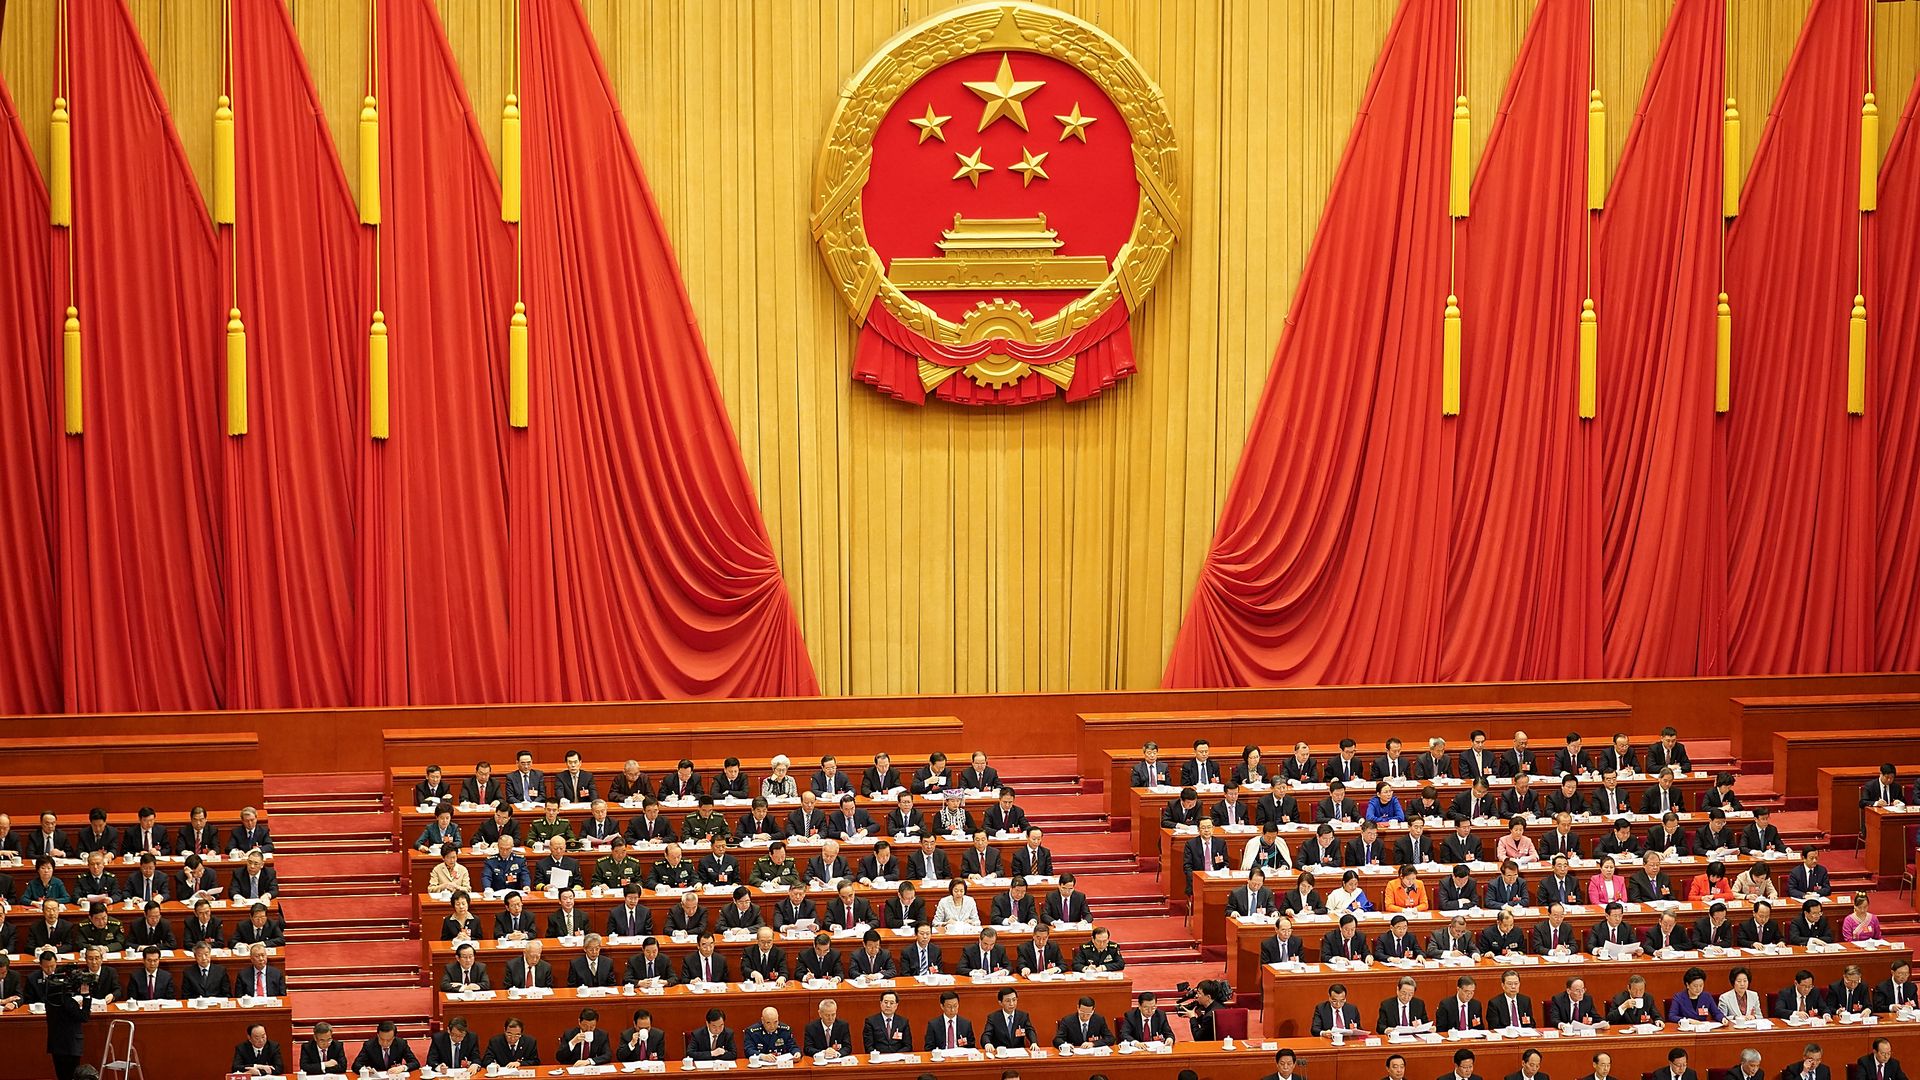 Chinese National Assembly